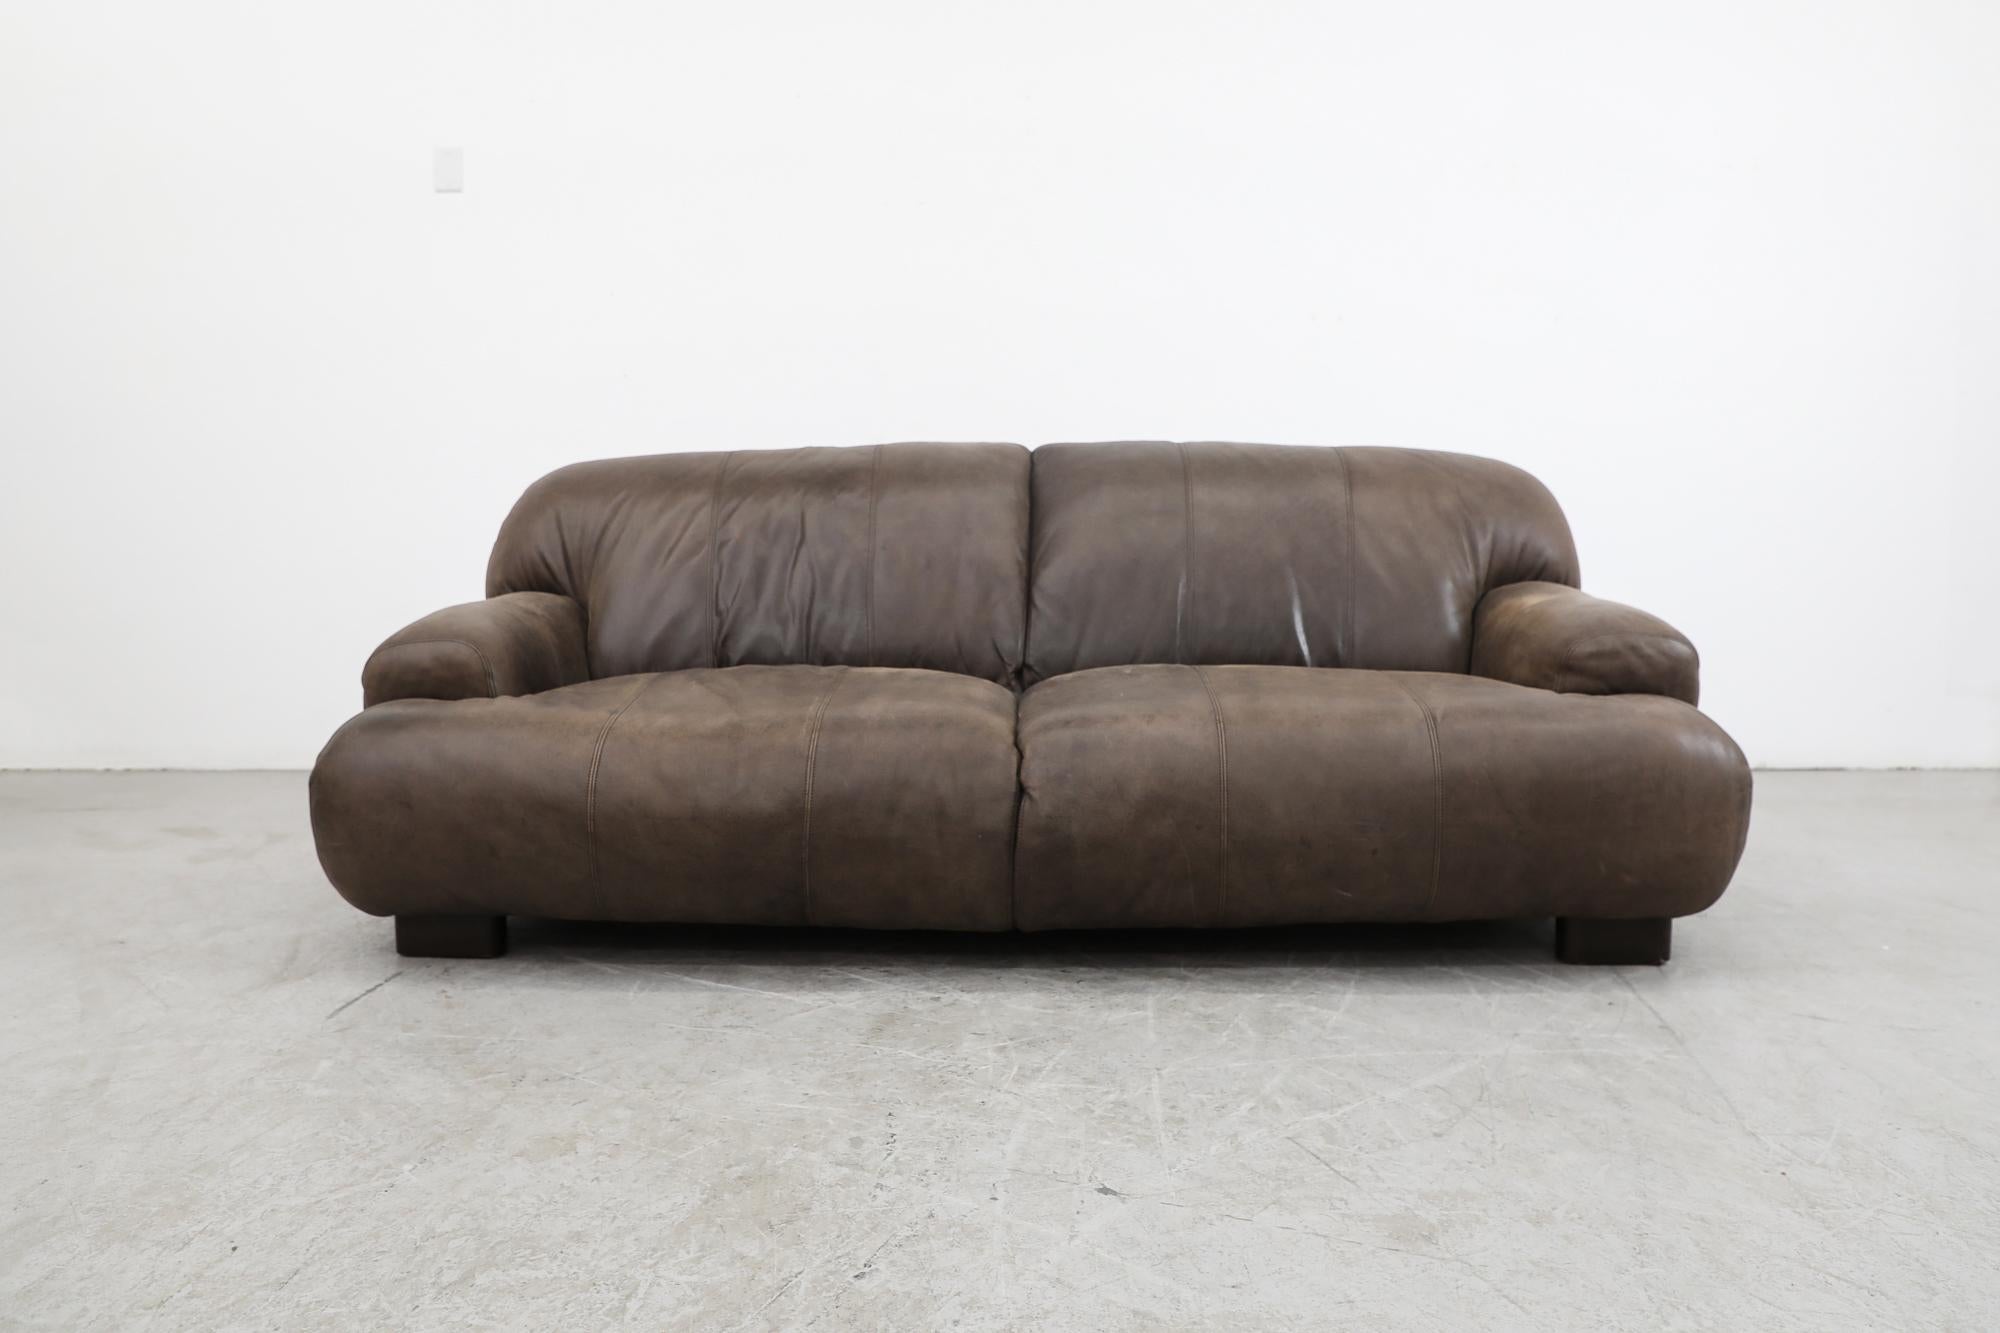 Mid-Century, De Sede style, super stuffed brown leather sofa with comfortably deep seating and nicely compact arm rests. Attractively rounded lines make this a very inviting and eye-catching piece. The sofa is in original condition with a great